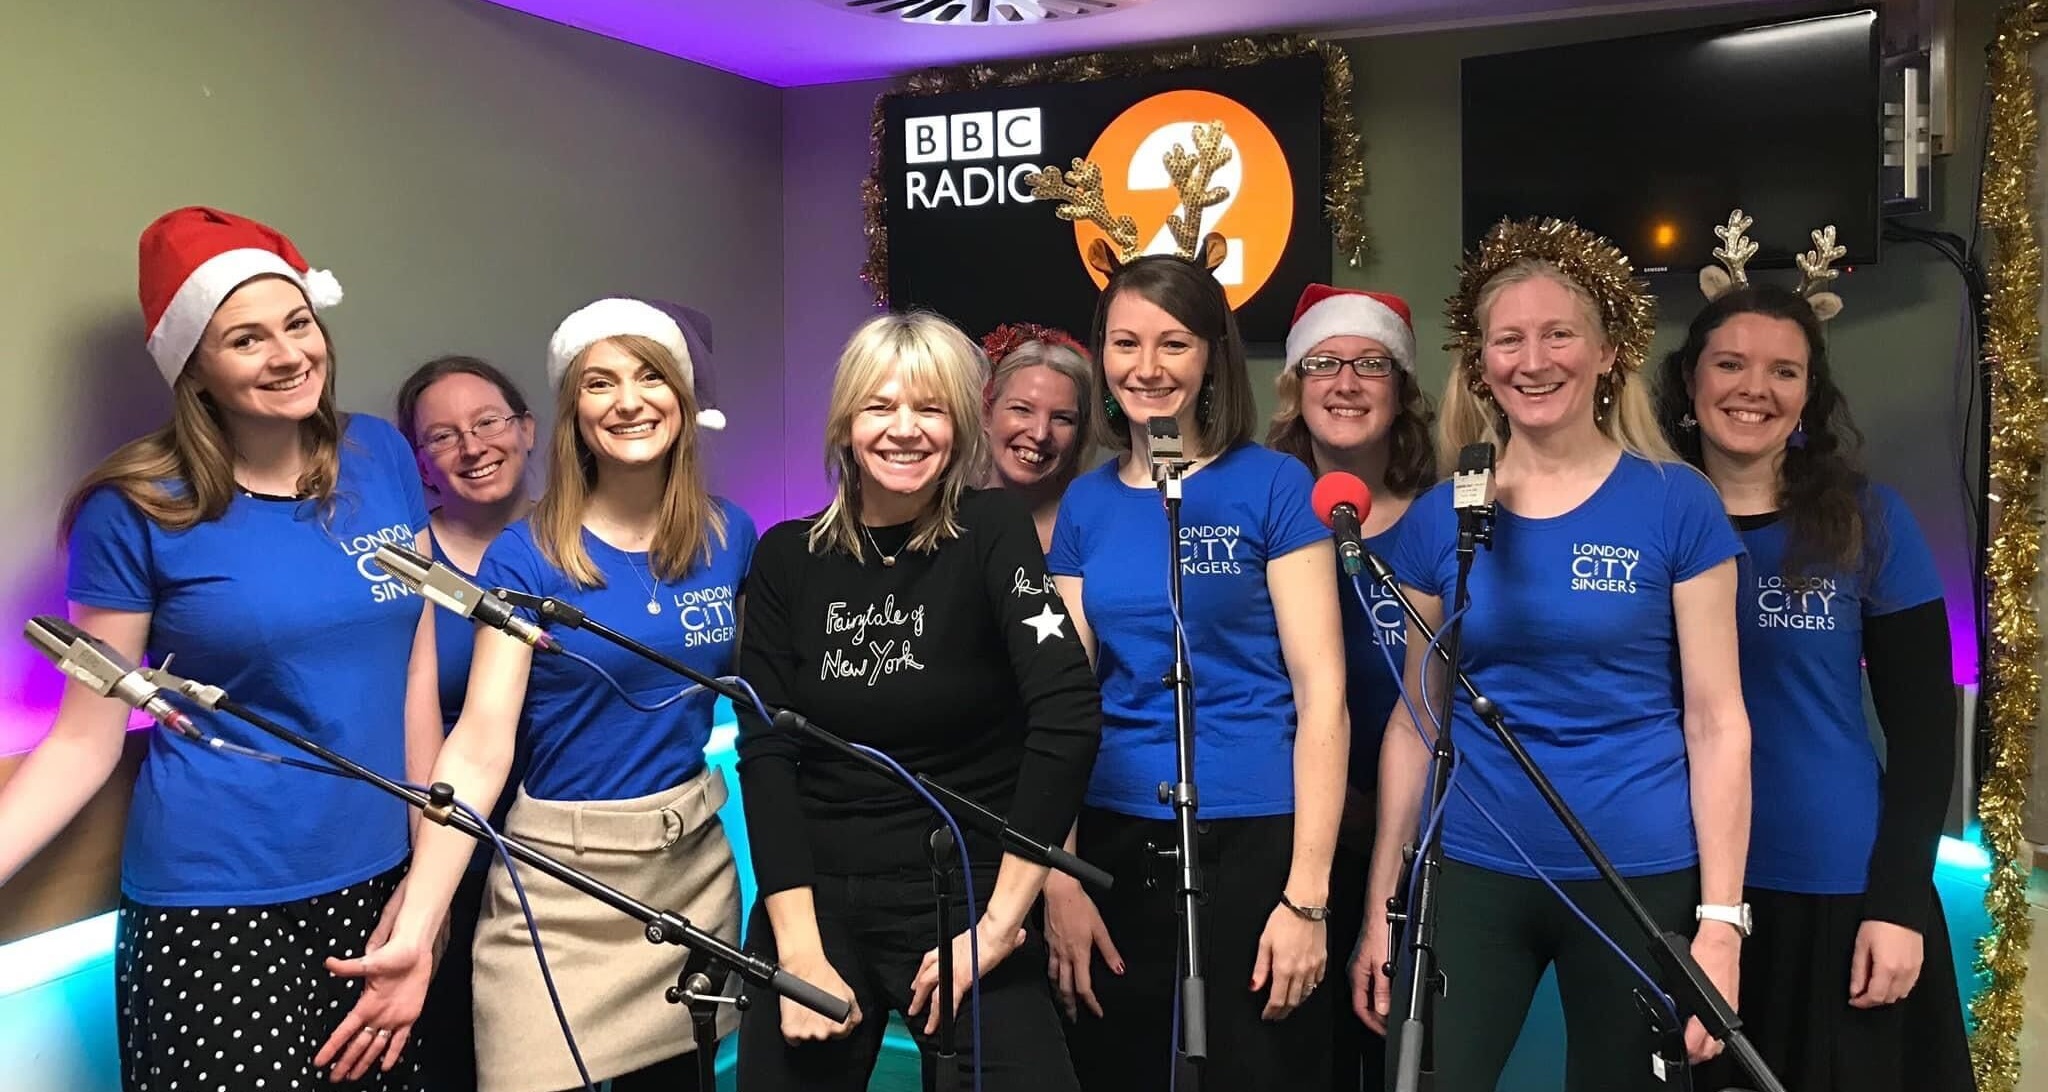 Some of LCS at BBC Radio 2 with Zoe Ball